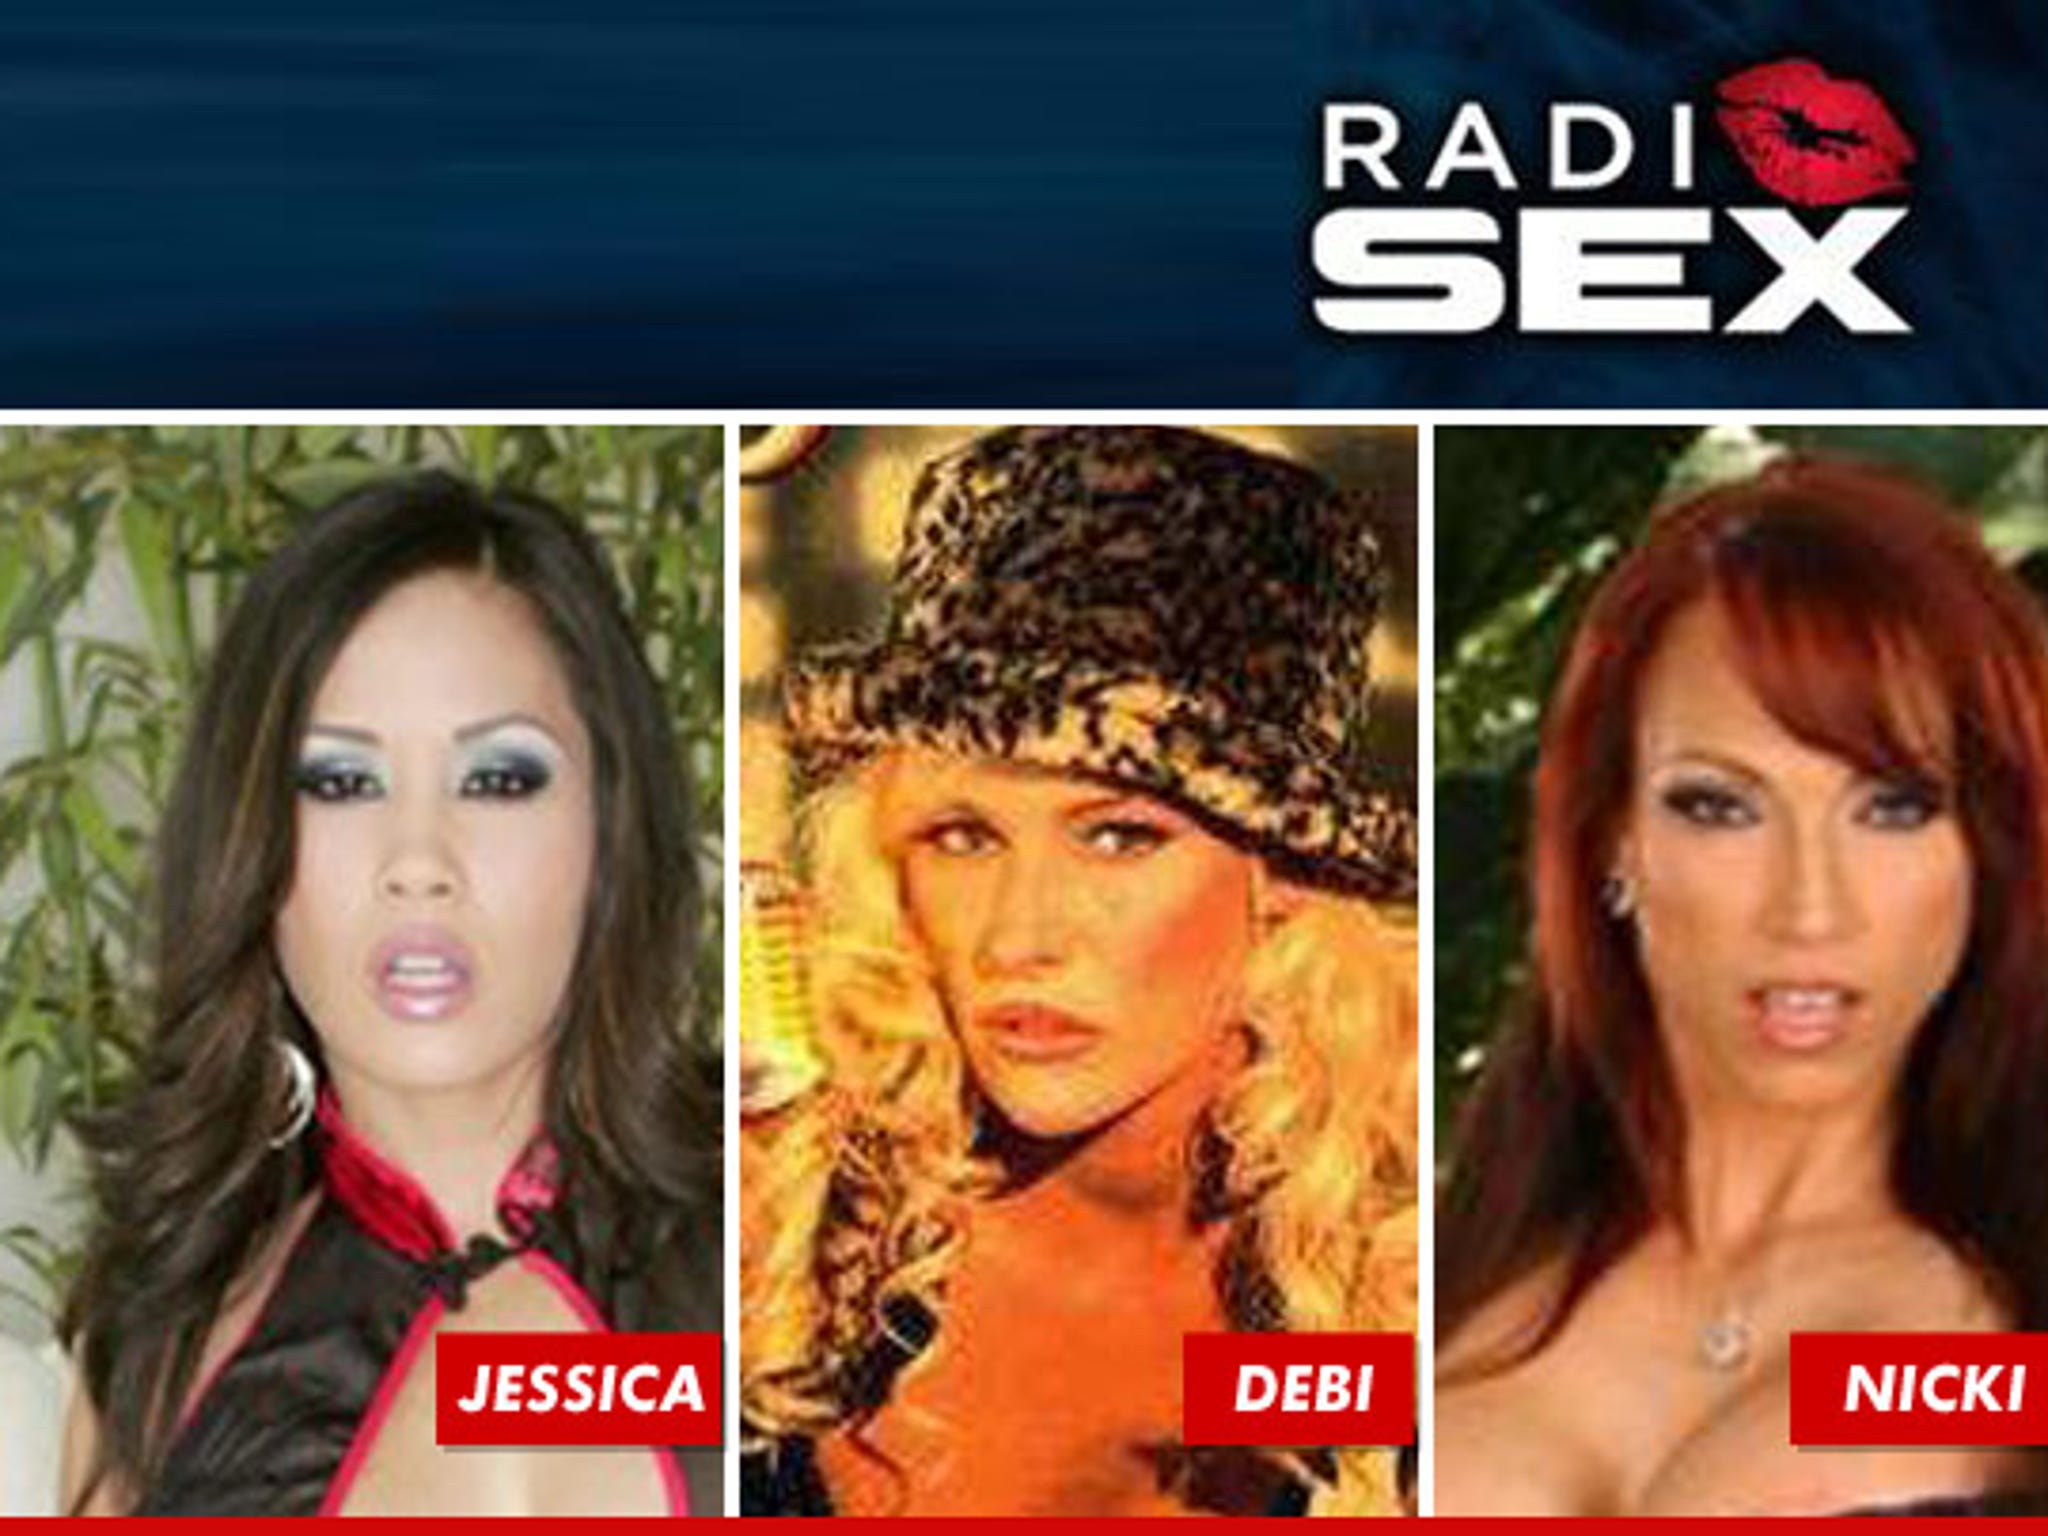 Porn Stars FIRED Over On-Air Sex With Syphilis Overtones image